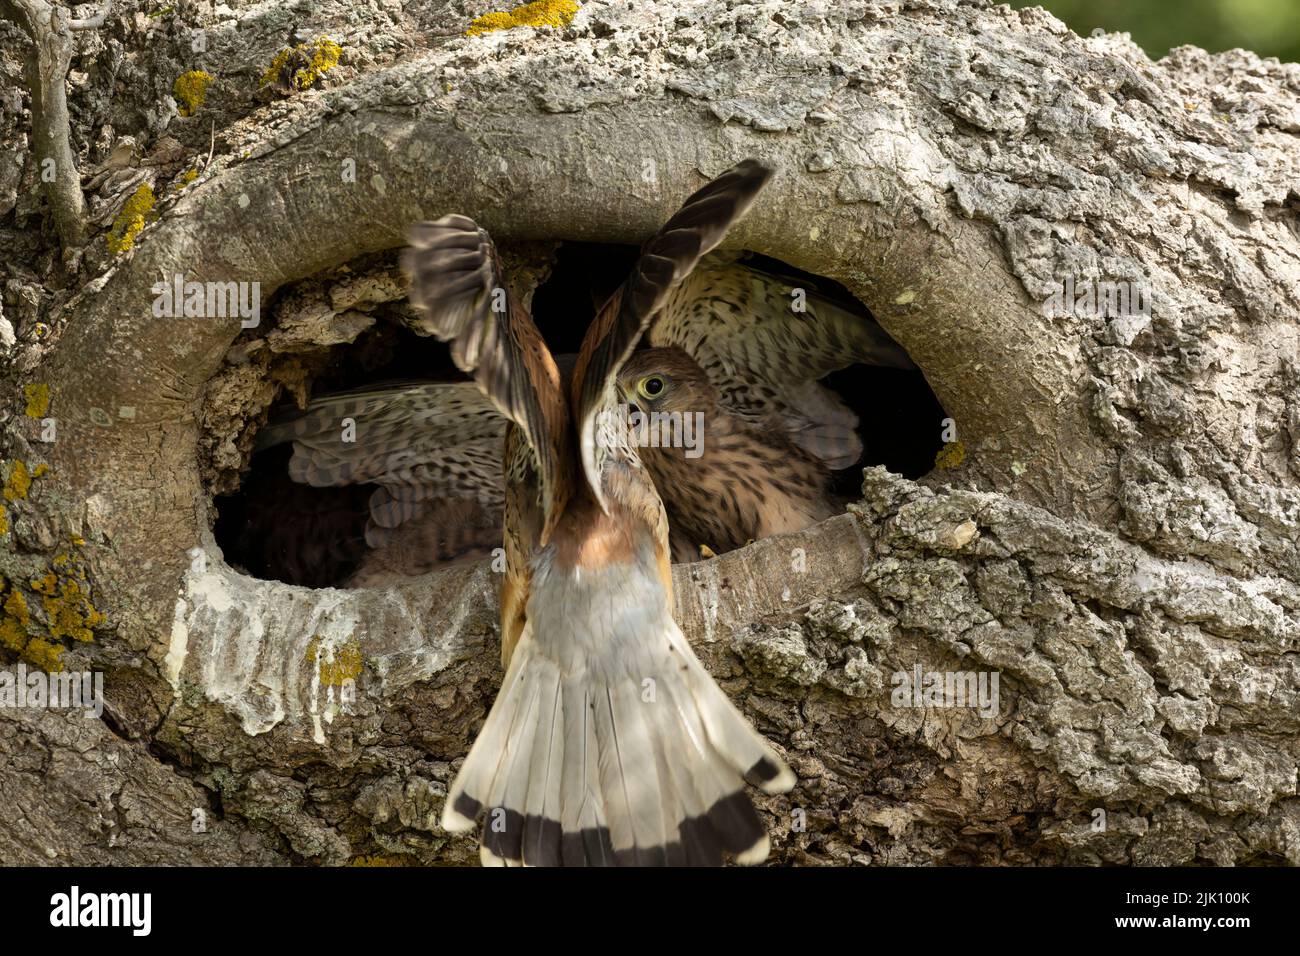 Young kestrels in their nest Stock Photo